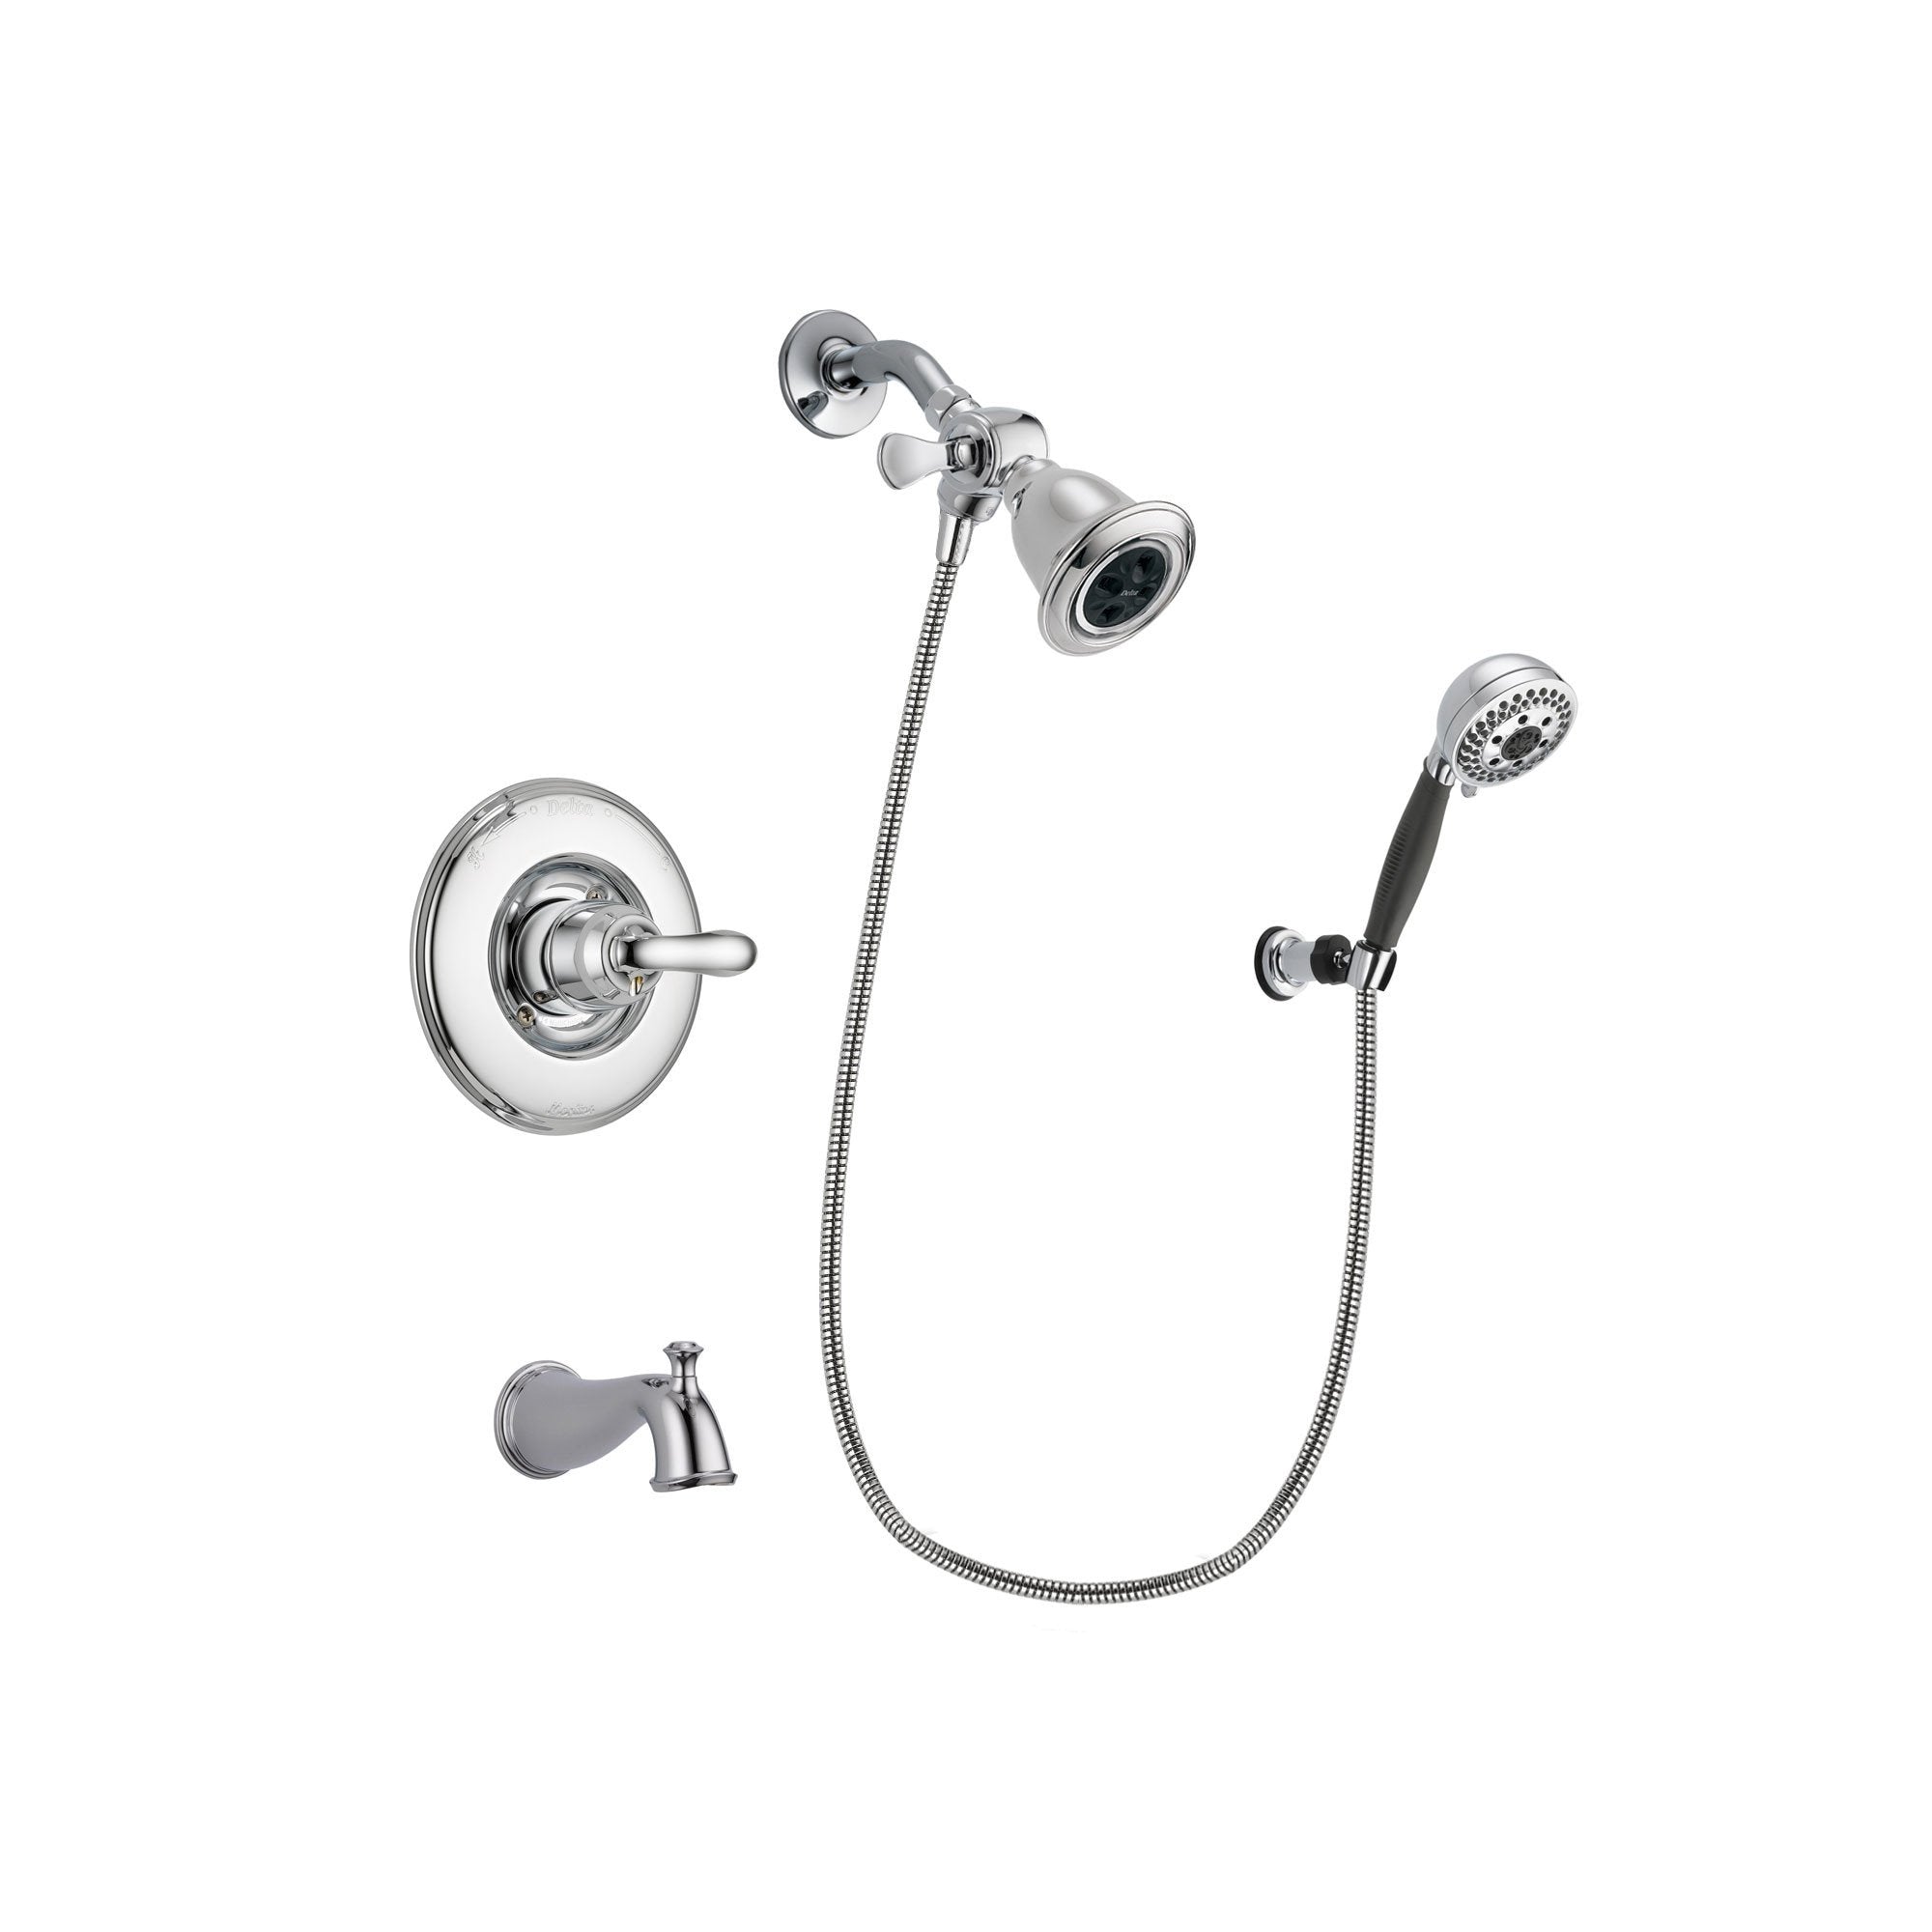 Delta Linden Chrome Finish Tub and Shower Faucet System Package with Water Efficient Showerhead and 5-Spray Modern Handheld Shower with Wall Bracket and Hose Includes Rough-in Valve and Tub Spout DSP1157V